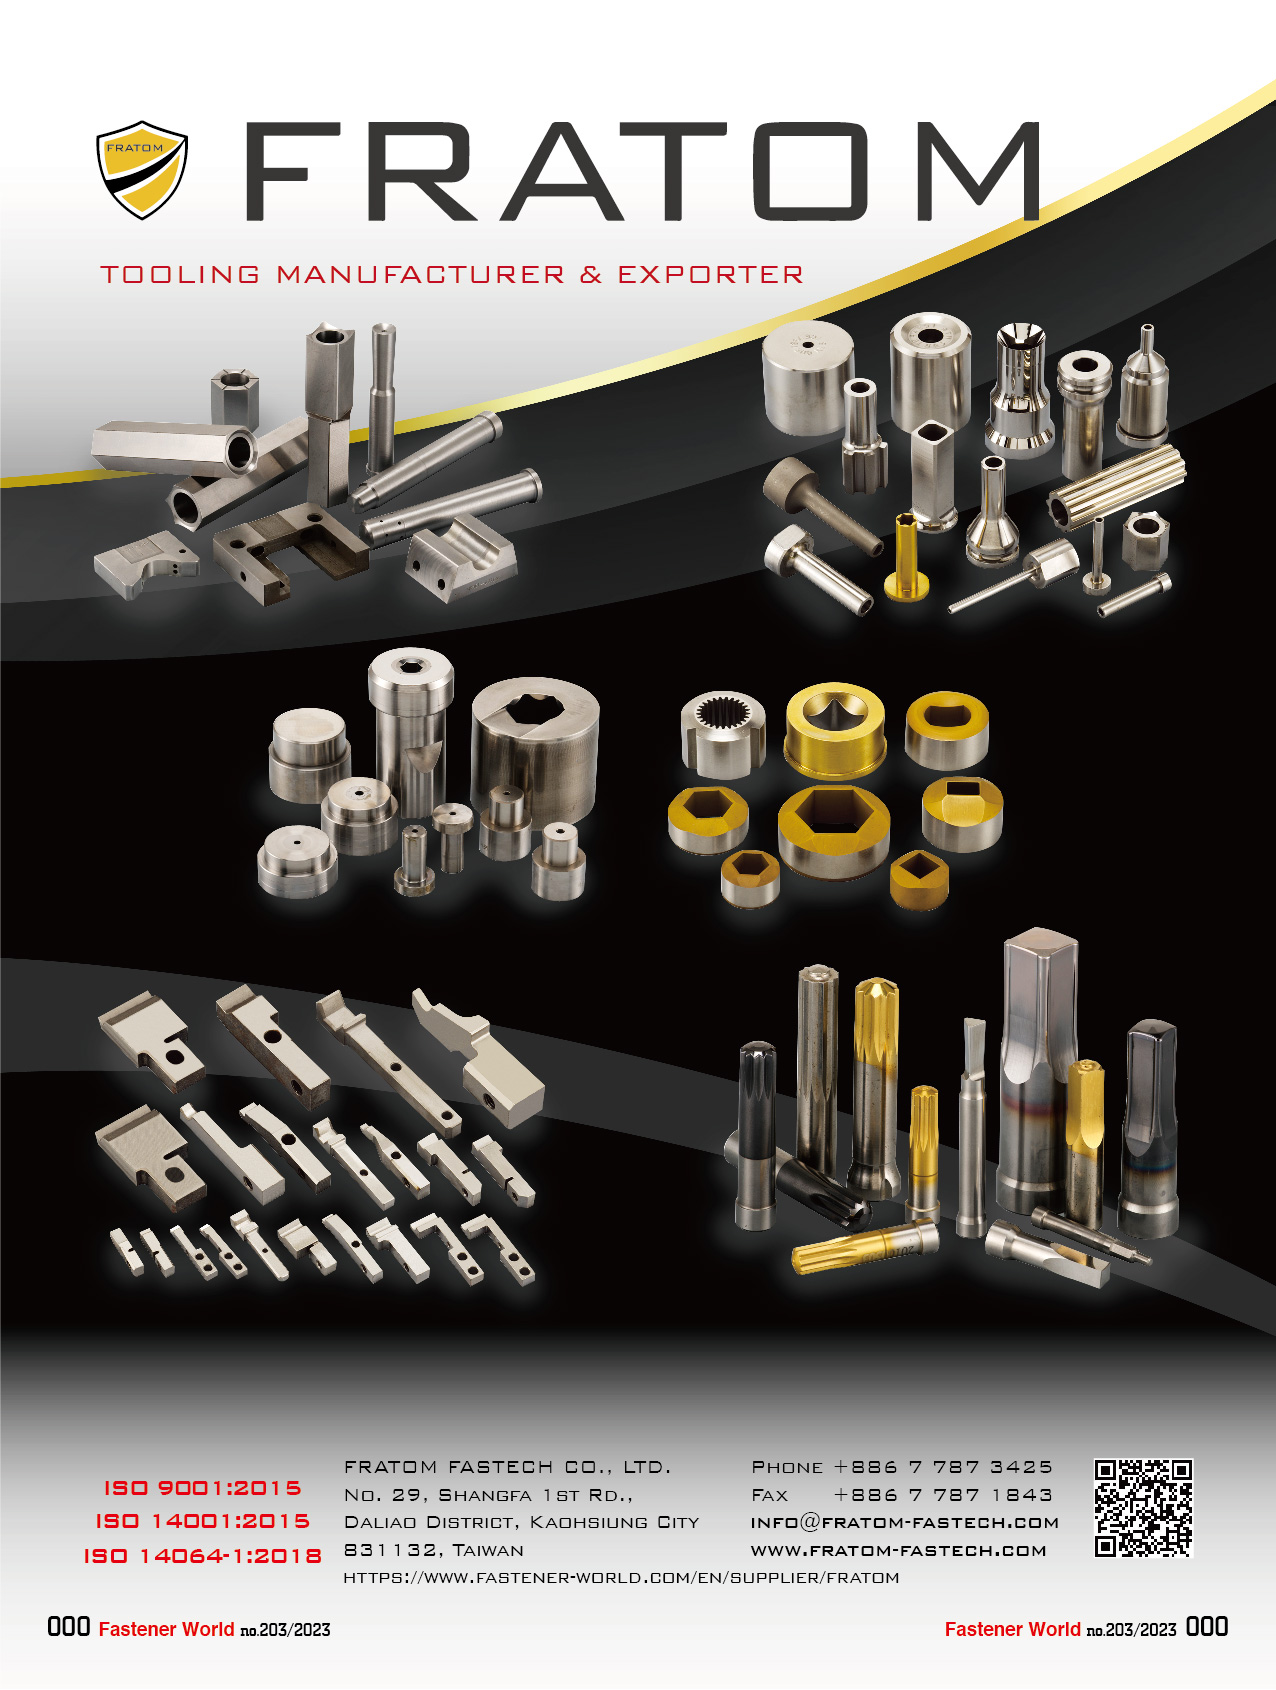 FRATOM FASTECH CO., LTD. , Die Cases, Hex Recess Punches, Tungsten Carbide Tools And Cutters, First Punch Dies, Carbide Dies, Carbide Pins, Header Punches, Header Toolings, K.o.pins, Knives, Multi-die Punches, Tungsten Carbide Die, Second Punch Cases, Punch Pins, Trimming Dies, Molds & Dies, Phillips Punches, Pozi Punches, Punches, Hexagon Pin Punch, Segmented Hexagon Dies, Square Punches, Hexagon Punches, TORX Punches, Tooling For Forming Machine , Carbide Dies